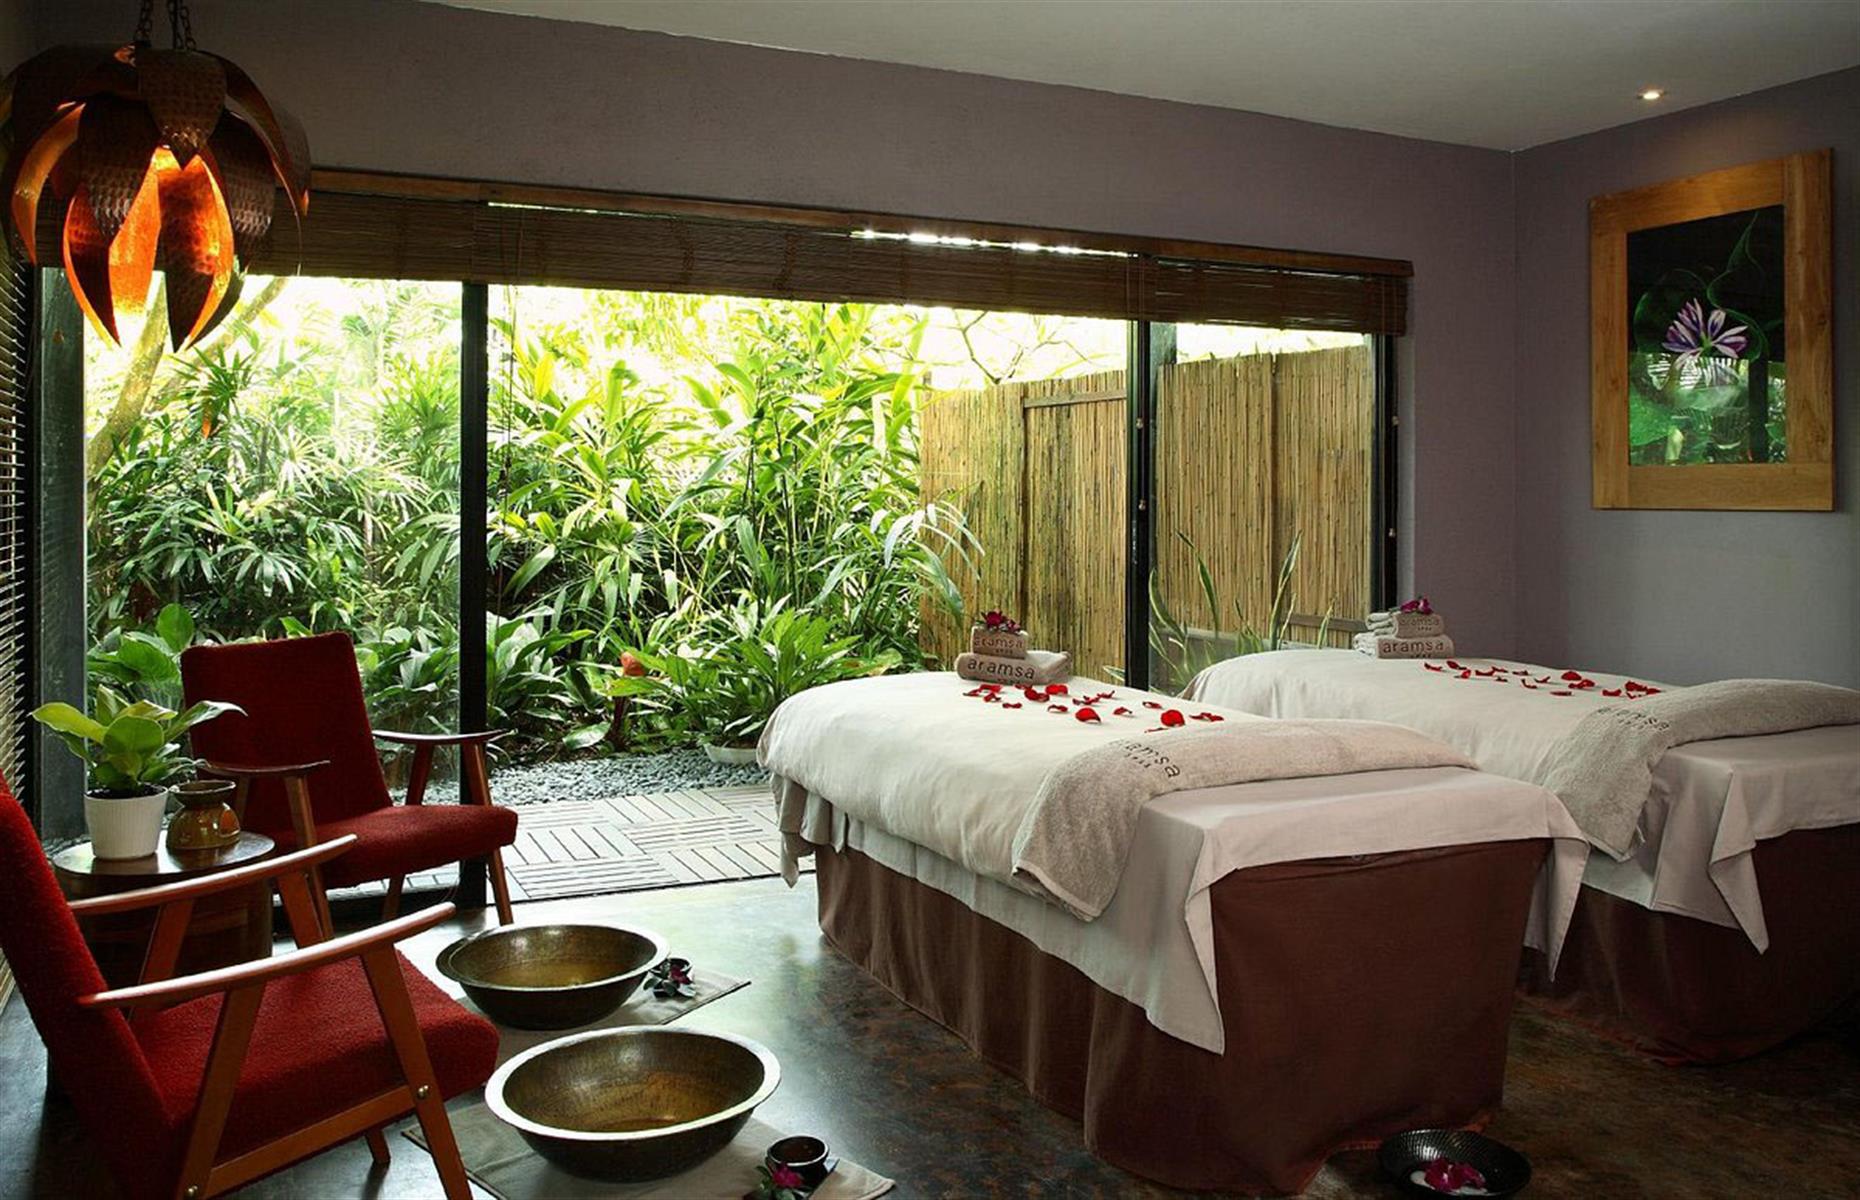 <p>Alongside the wonderful hustle and bustle that a trip to Singapore brings, you might want to take an afternoon to slow down and relish in some R&R – and Aramsa Spa, tucked away in the serene 62-acre Bishan-Ang Mo Kio Park, is the place. A holistic treatment at this award-winning spa will make you feel like a new person. The staff blend their own essential oils, which you can choose as part of a 60-minute Signature Massage. The spa has 13 therapy rooms surrounded by 30 different types of plants in the lush gardens. Beauty therapist Claira says: “Coming here is like a retreat in an overseas escape; it doesn’t feel like Singapore. Bringing the outside in creates a chance to relax away from the city.” After your treatment, sip on a freshly brewed ginger tea and take a moment to pause.</p>